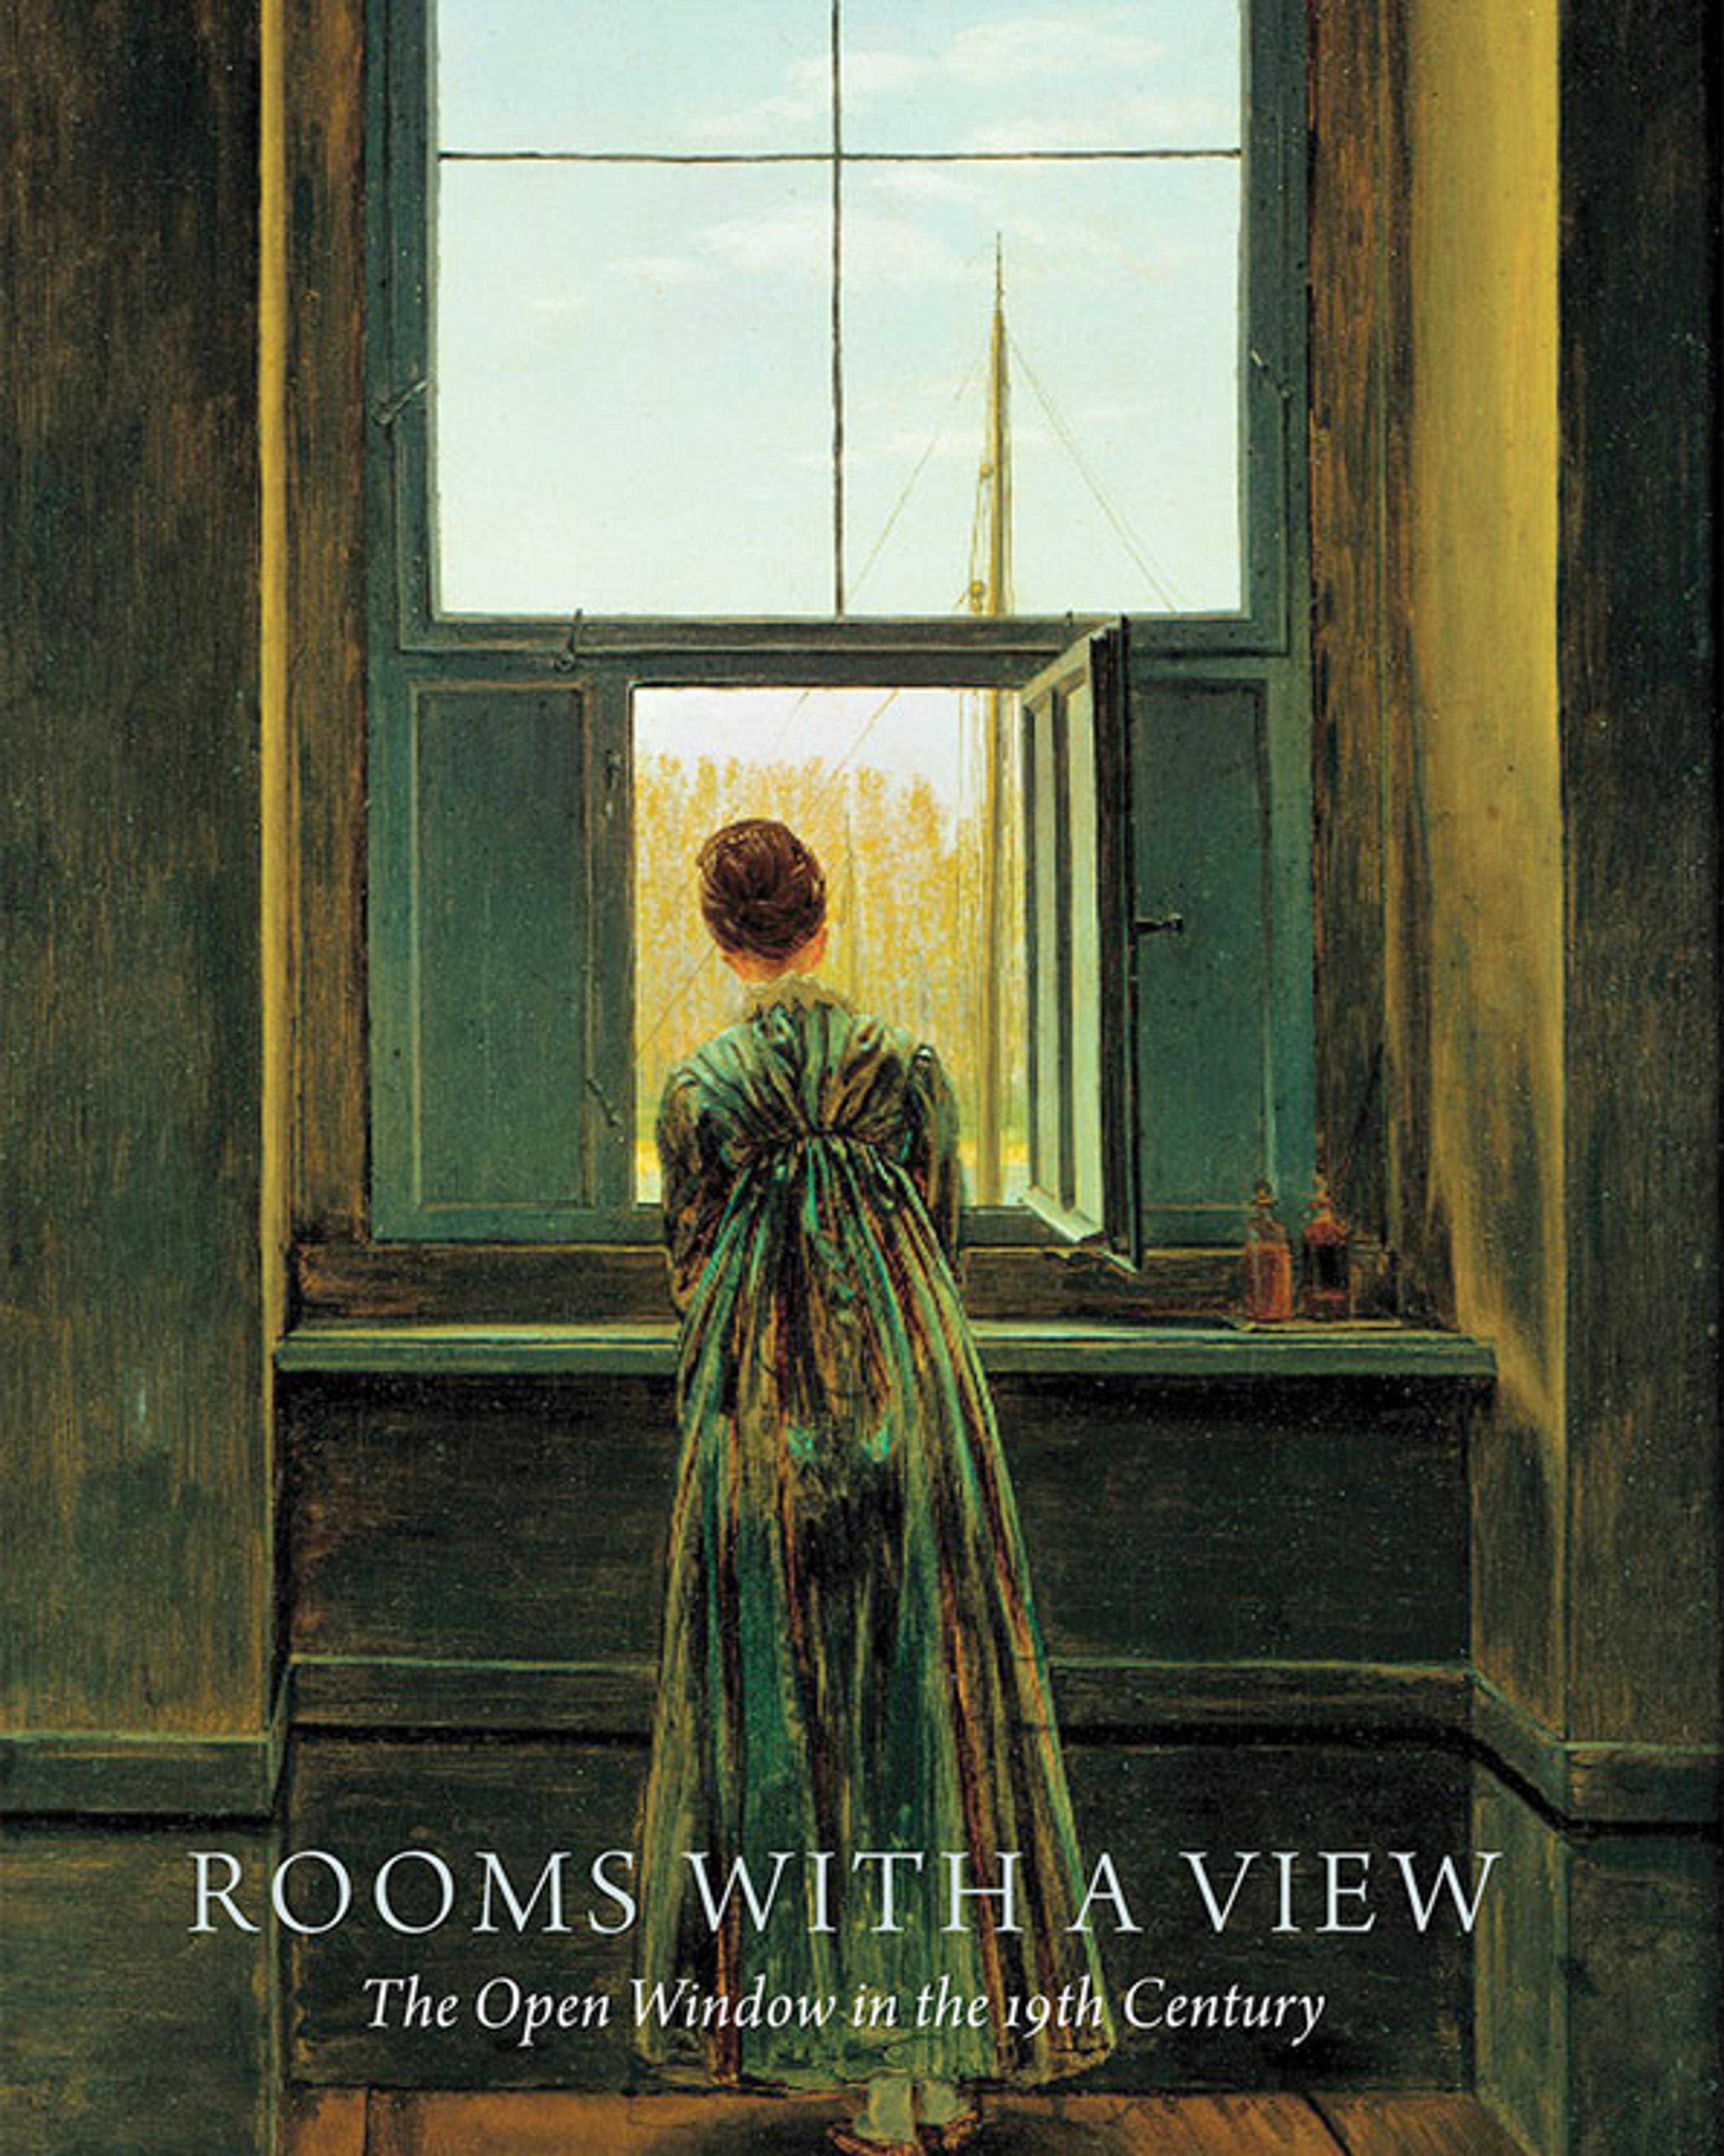 Catalogue cover for "Rooms with a View" 